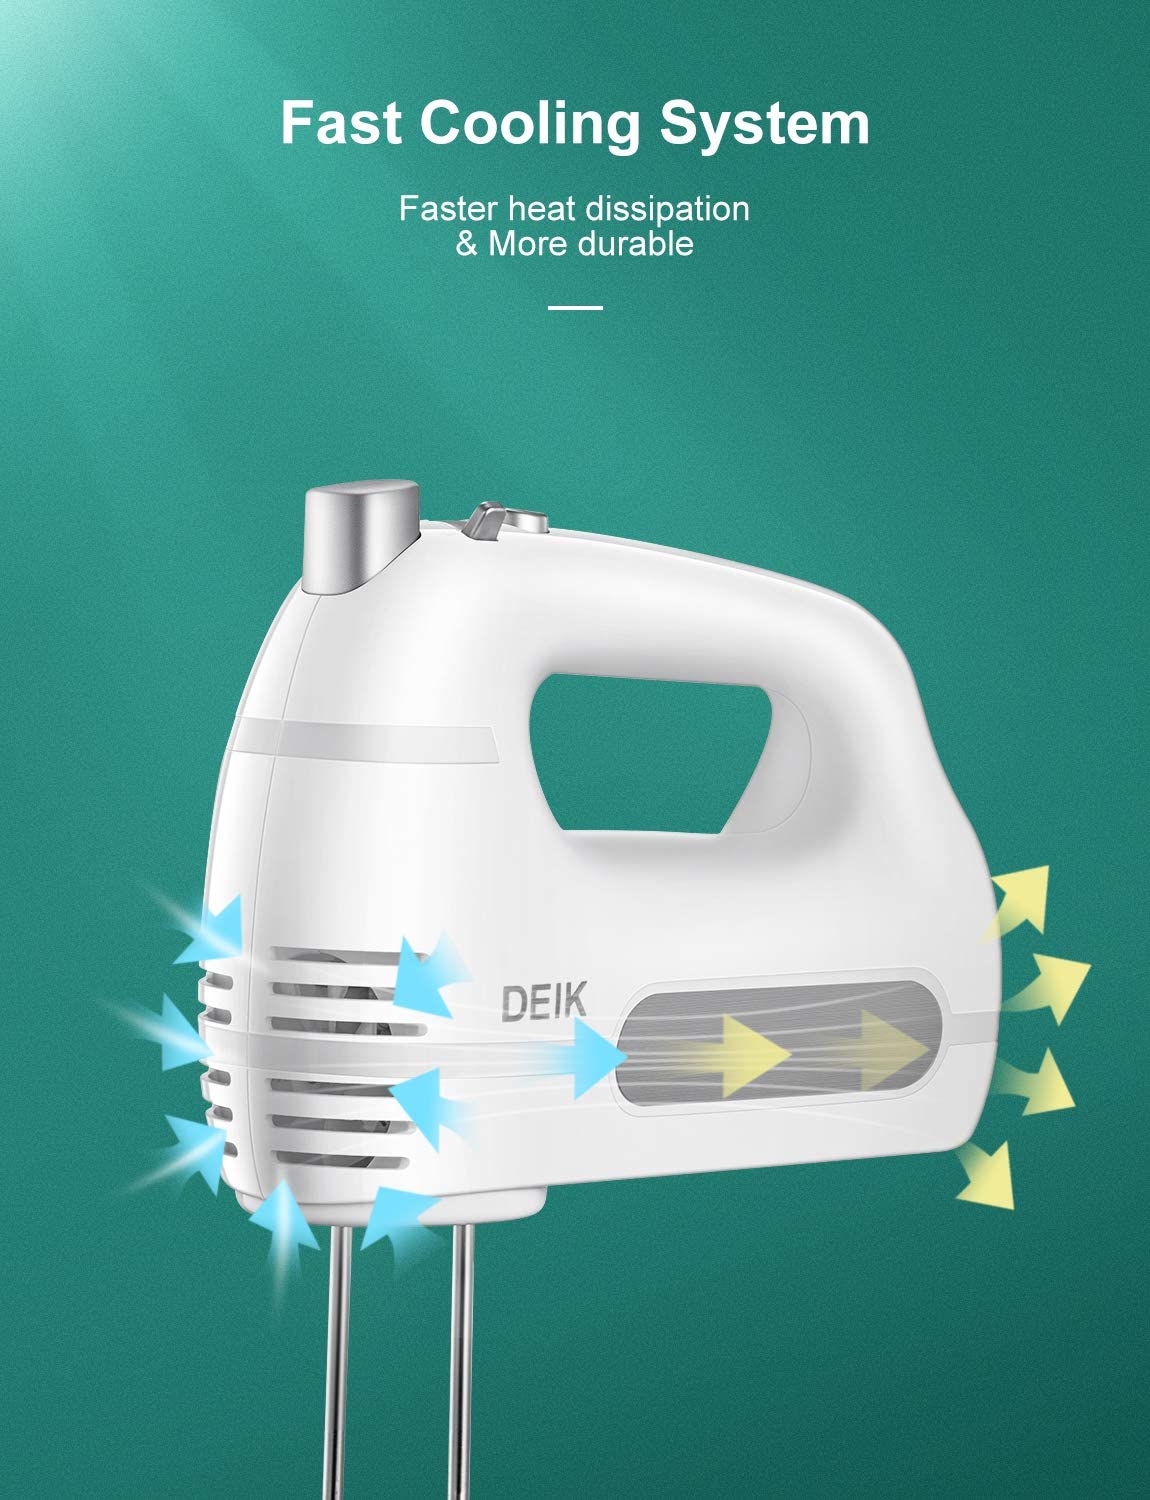 1pc 250w Electric Handheld Mixer With 5 Speed Sliding Button, Hm